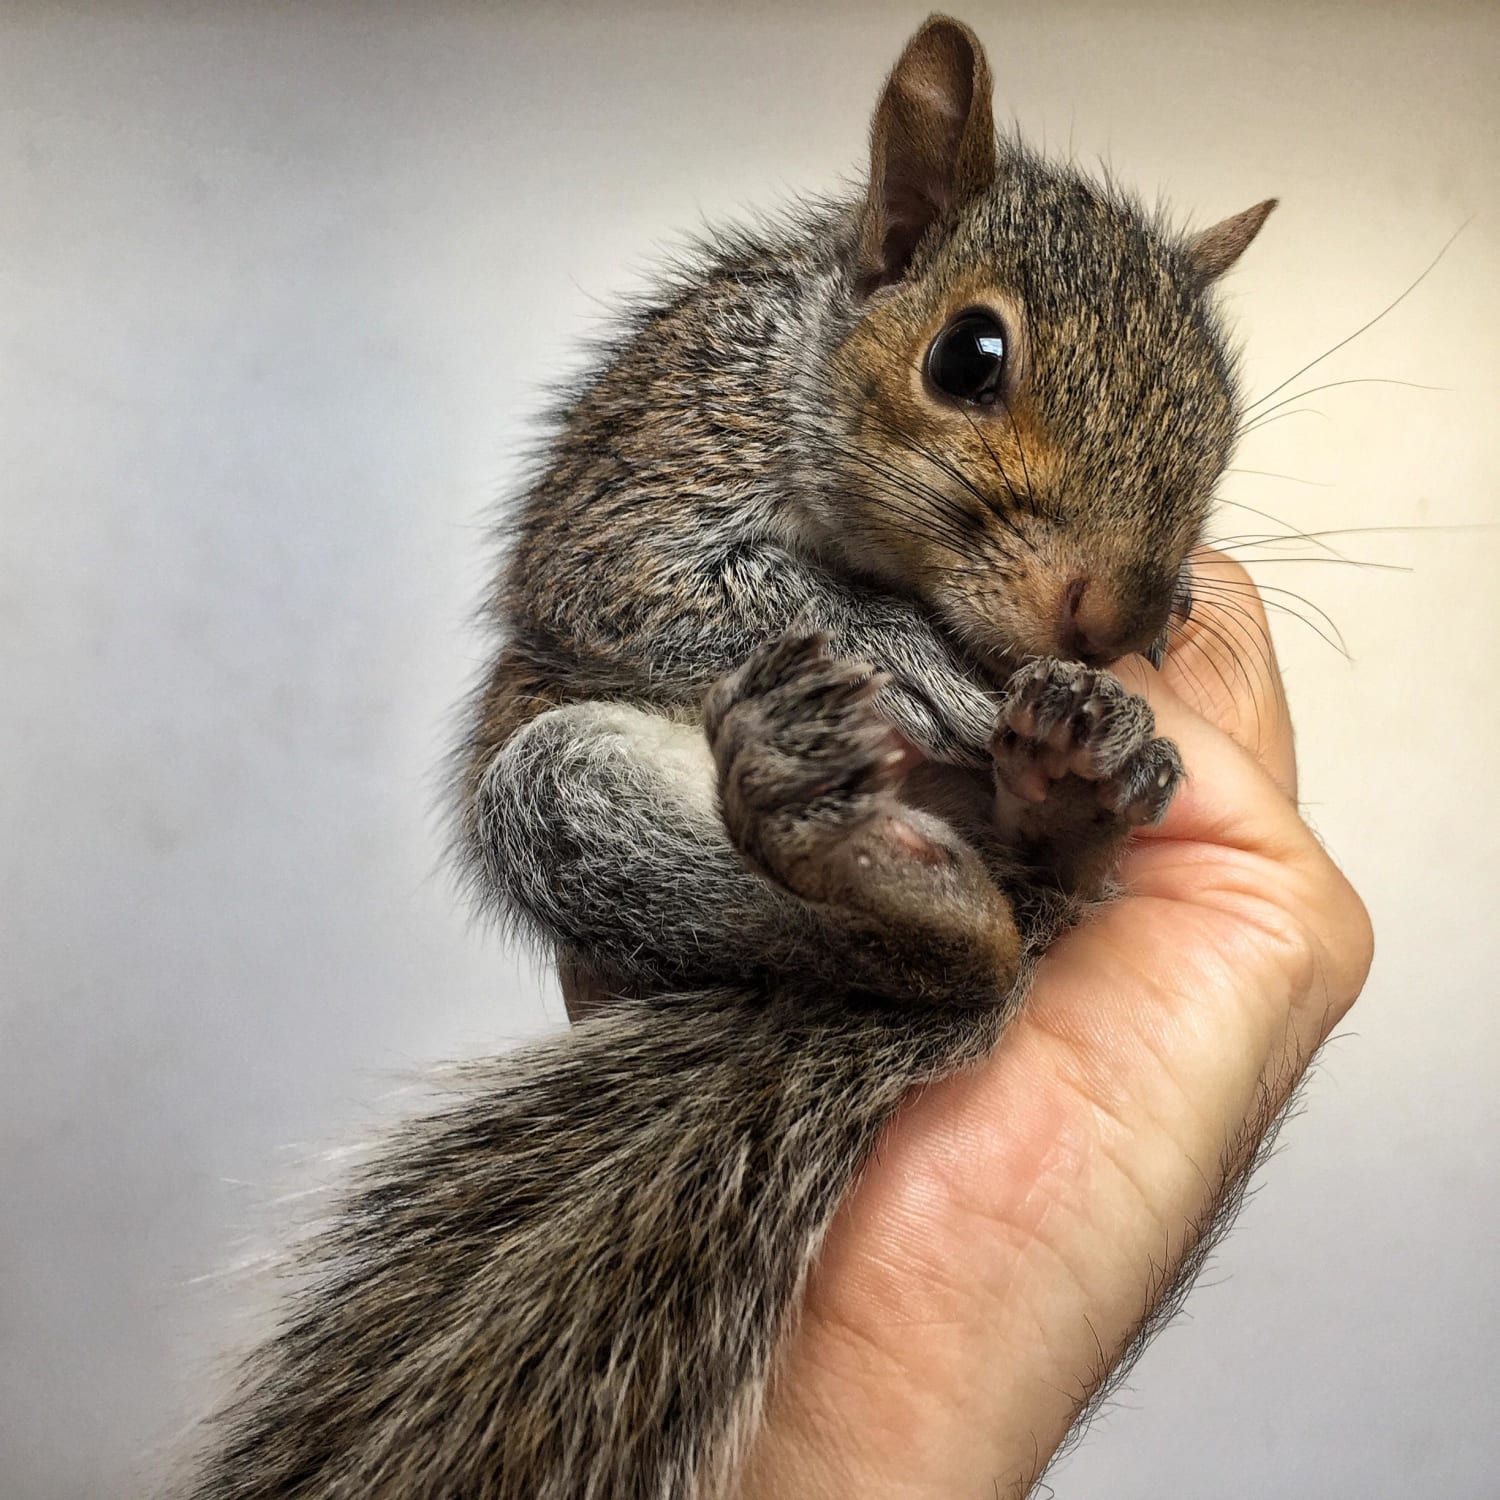 ITAP of a baby squirrel I raised and nursed back to health